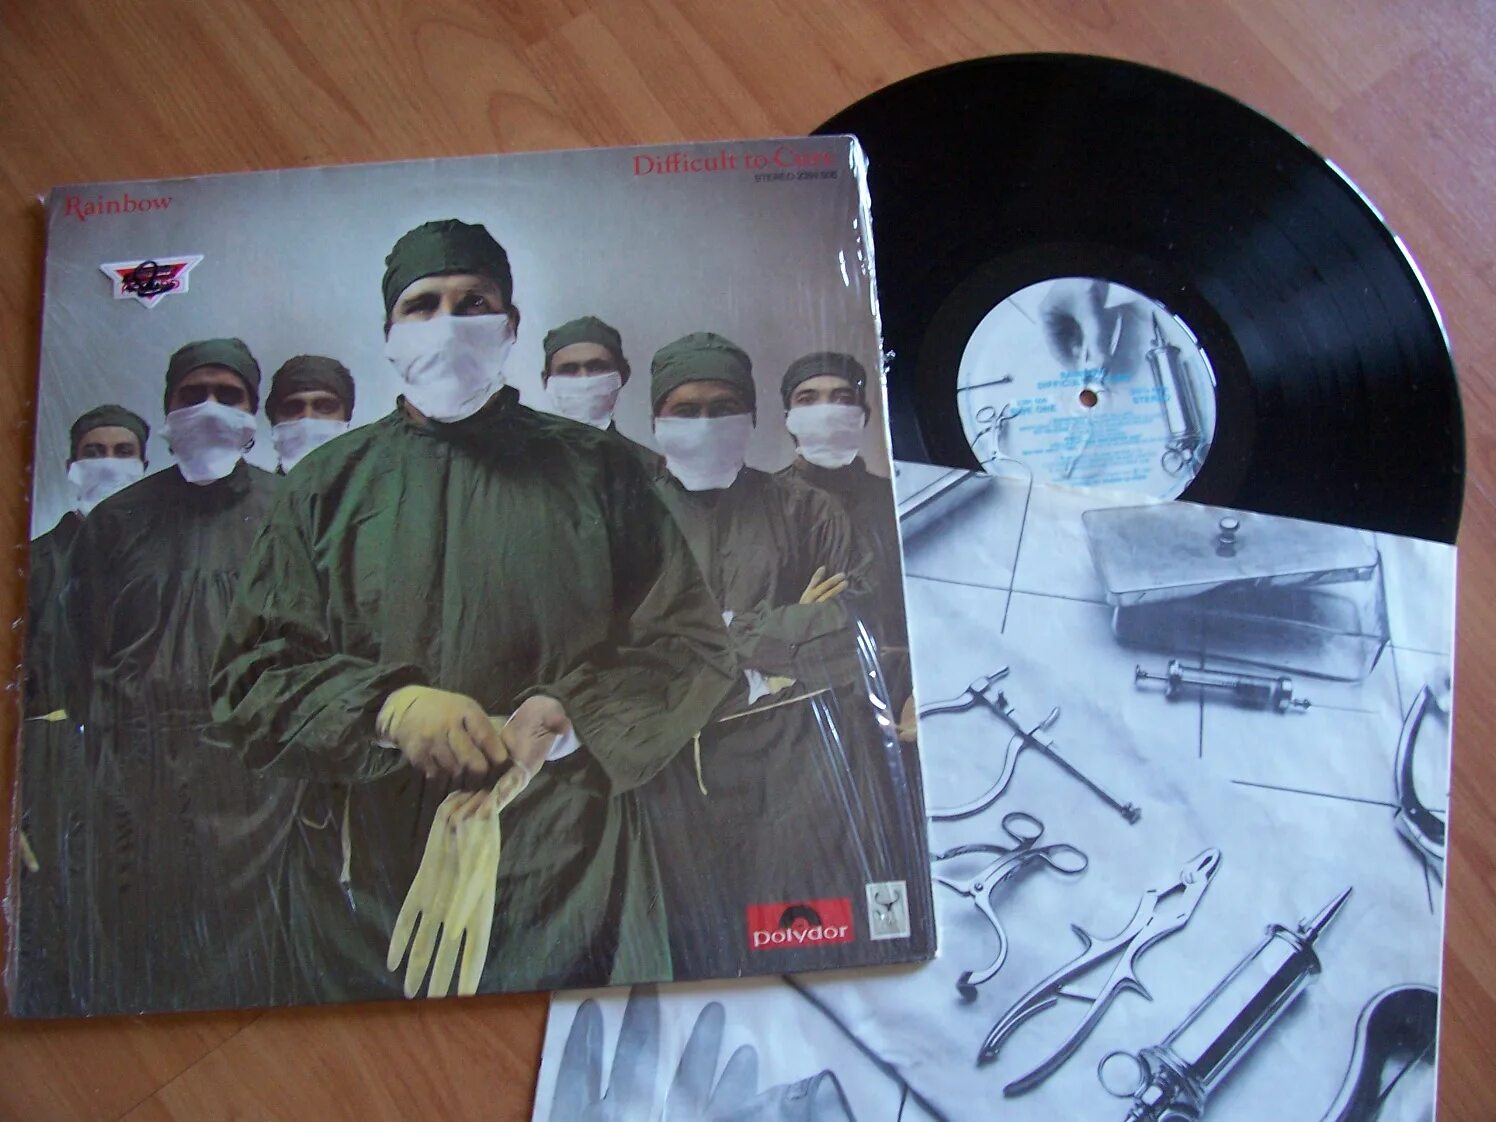 Rainbow difficult. Difficult to Cure (1981) Rainbow буклеты. Blackmore Ritchie Rainbow - 1981 - difficult to Cure.